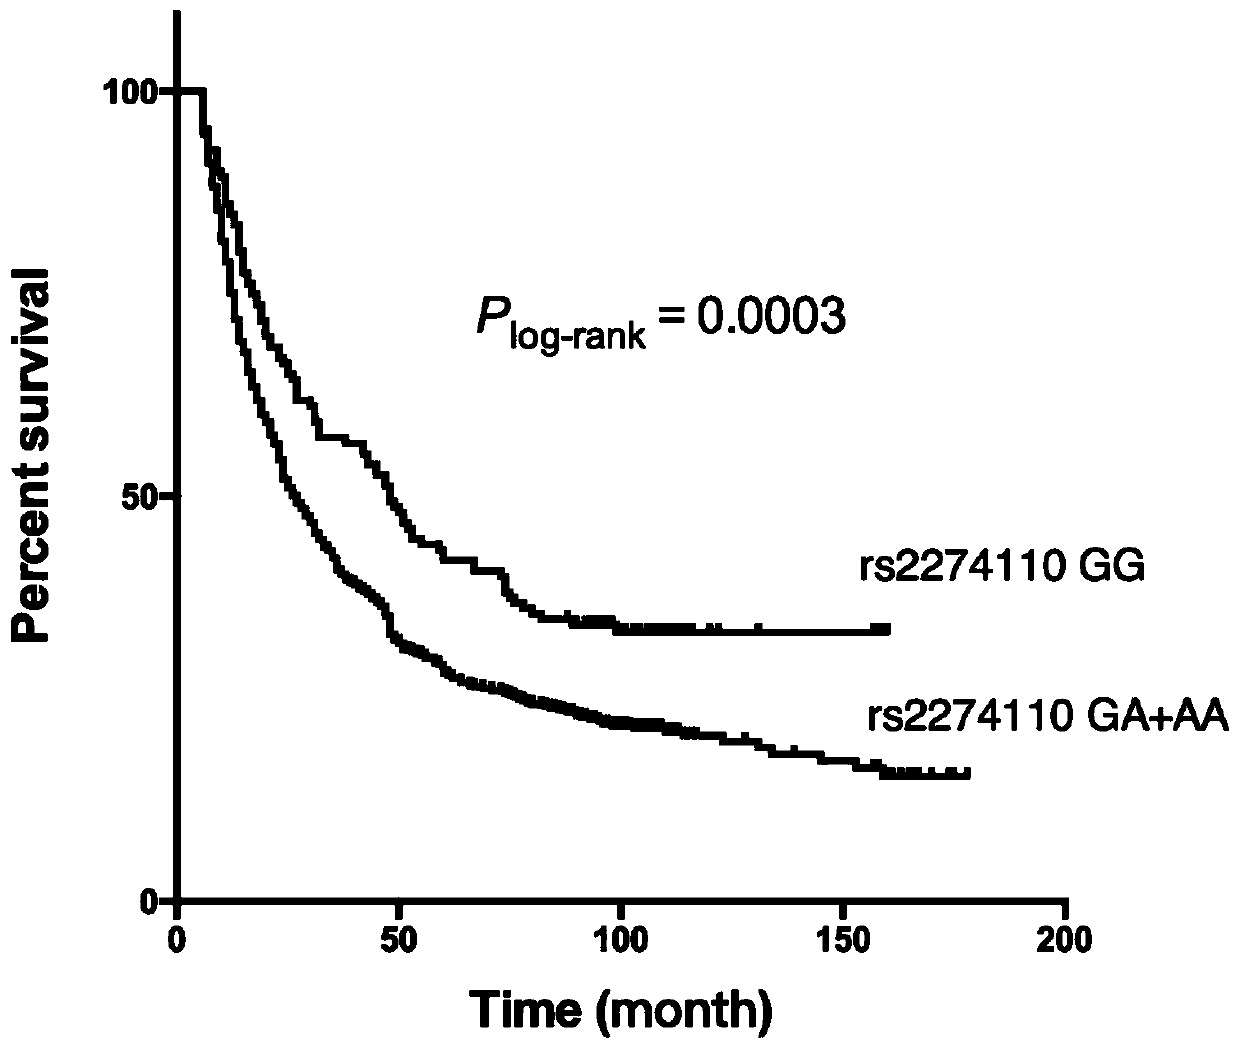 SNP marker related to prognosis of esophageal cancer patients and application thereof